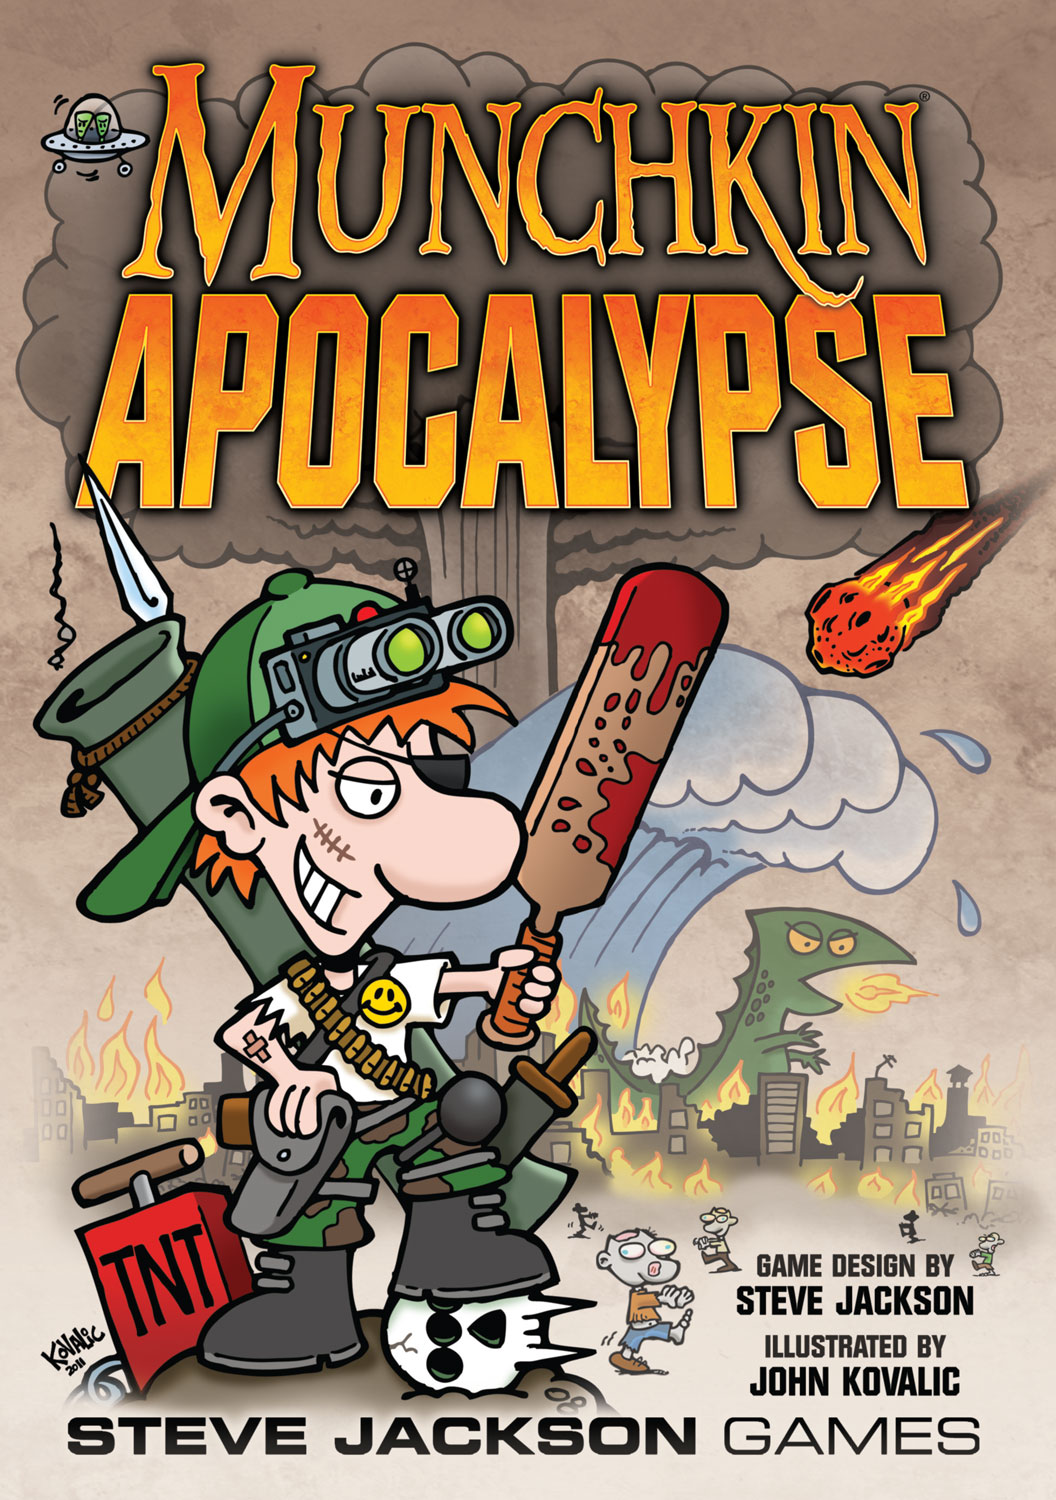 Sheep Impact Card Game Expansion From Steve Jackson Games Munchkin Apocalypse 2 